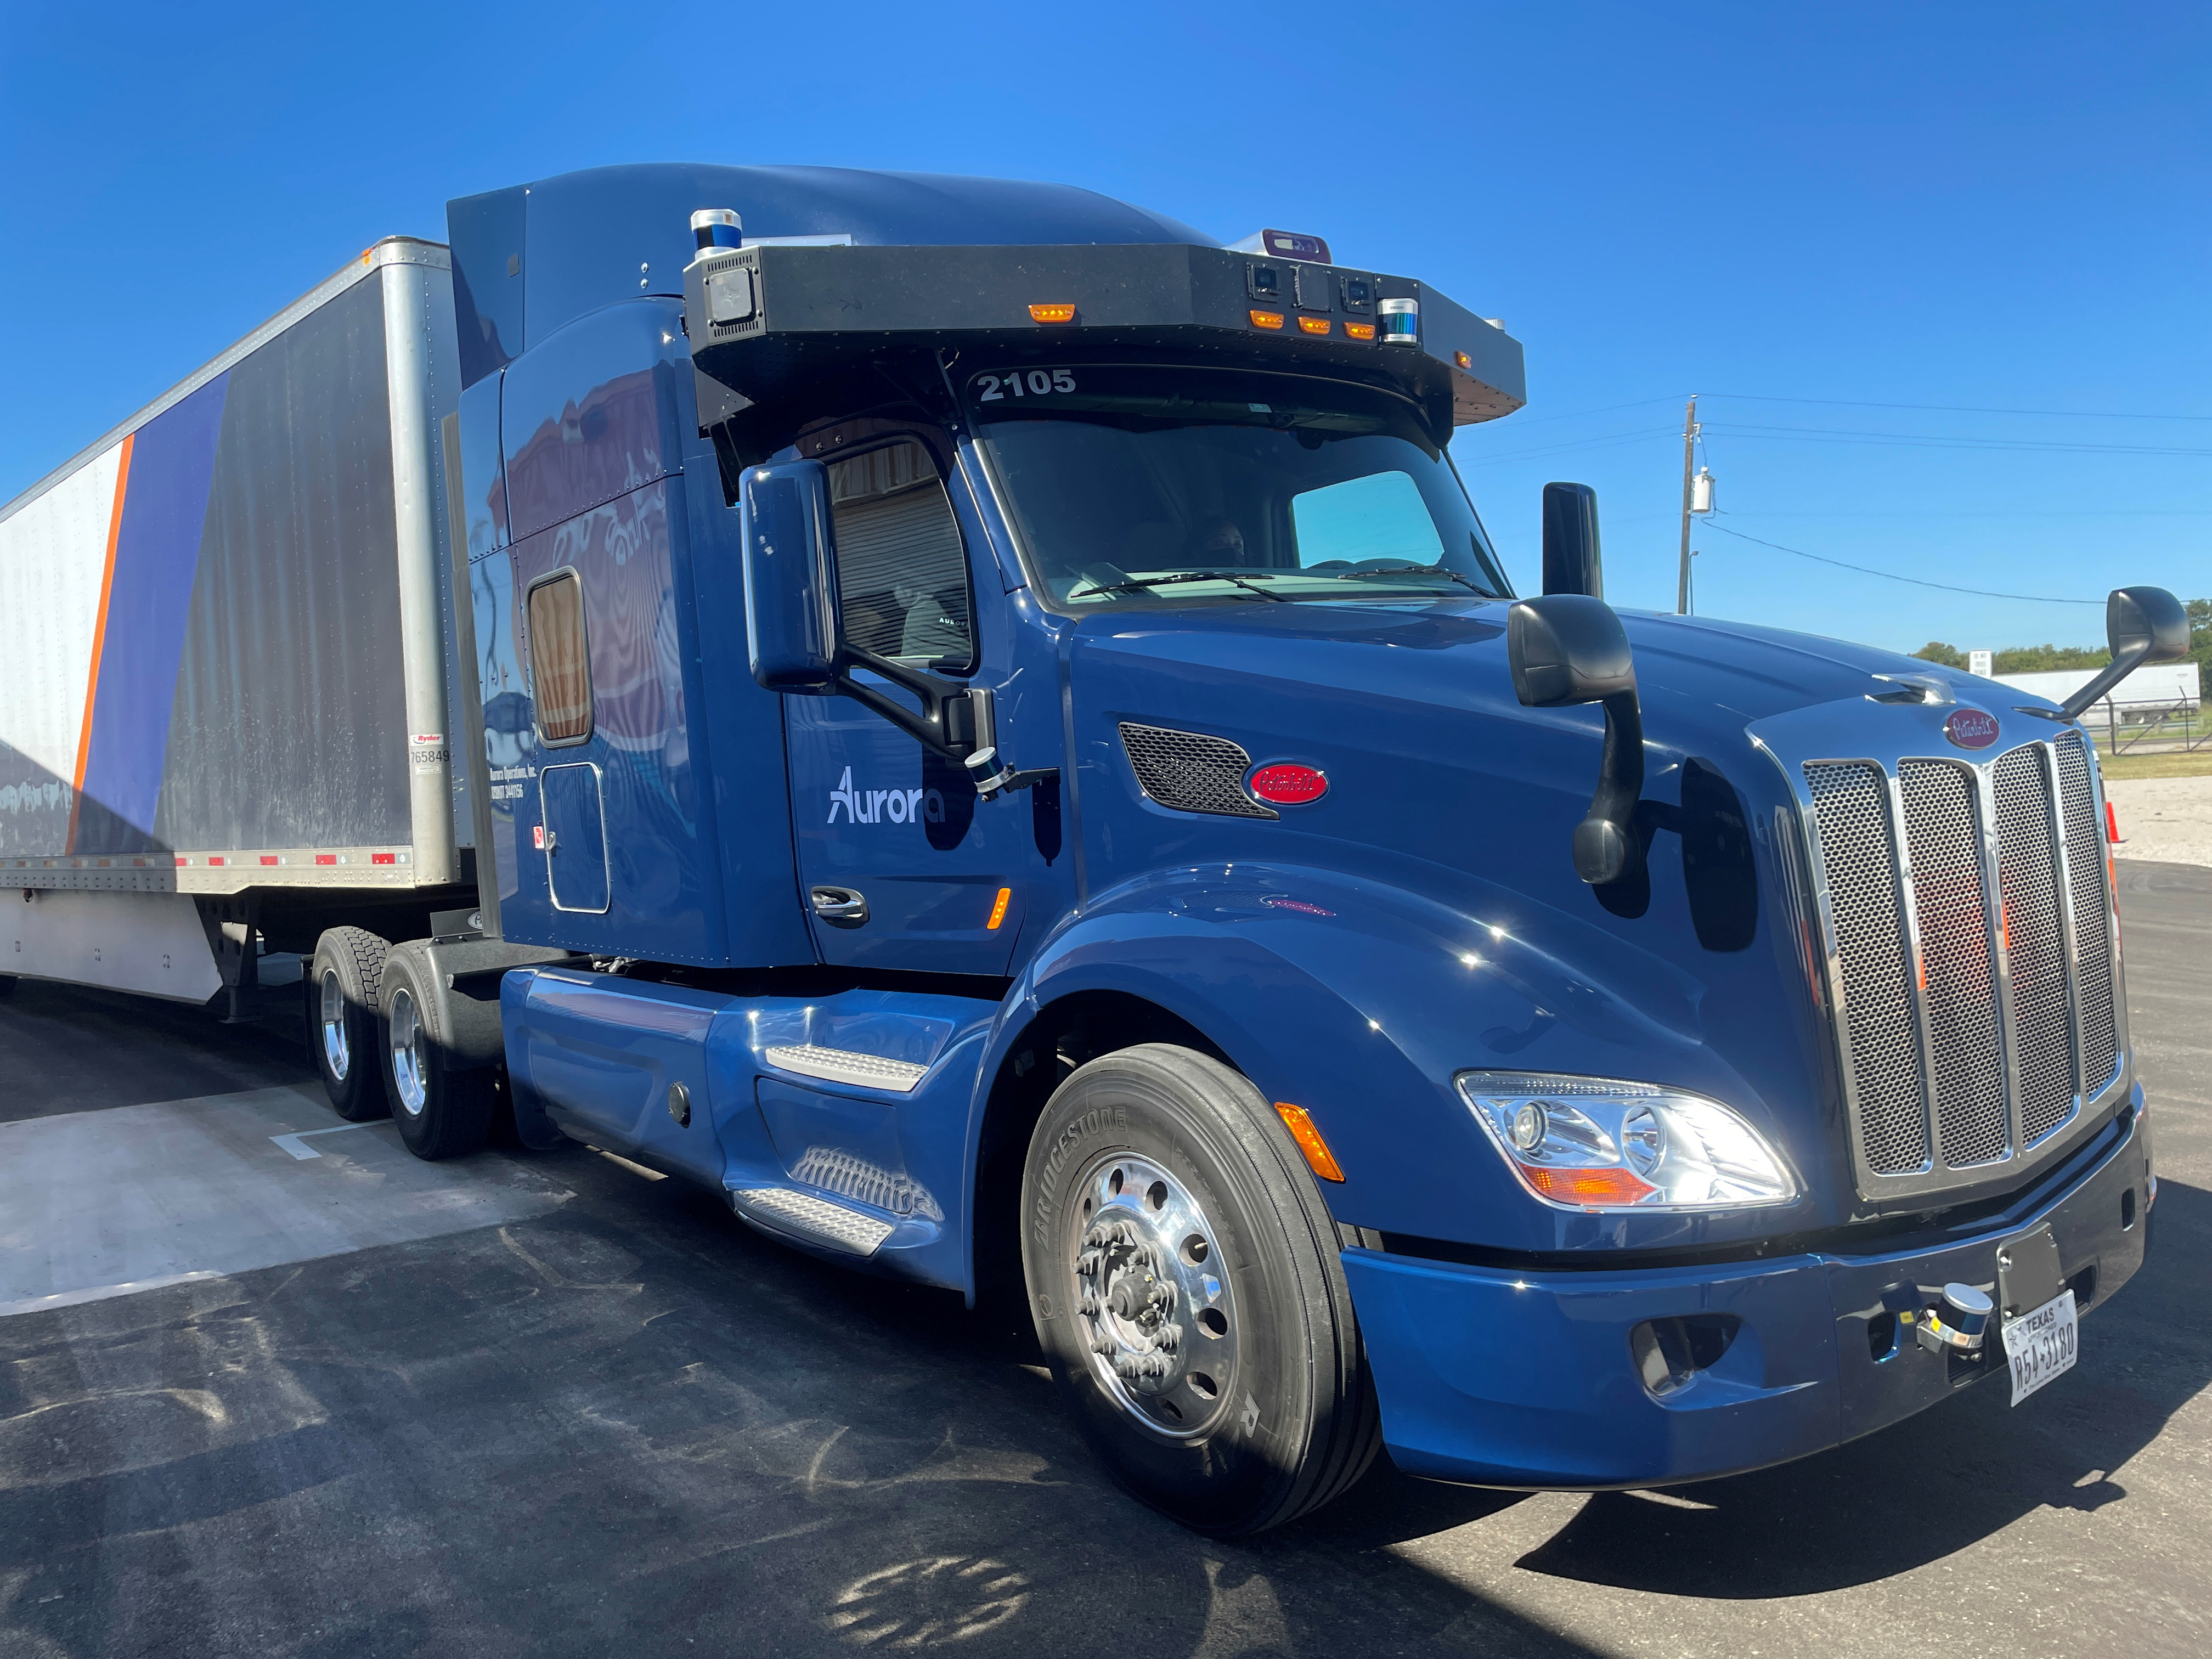 A Peterbilt 579 truck equipped with Aurora's self-driving system is seen at the company's terminal in Palmer